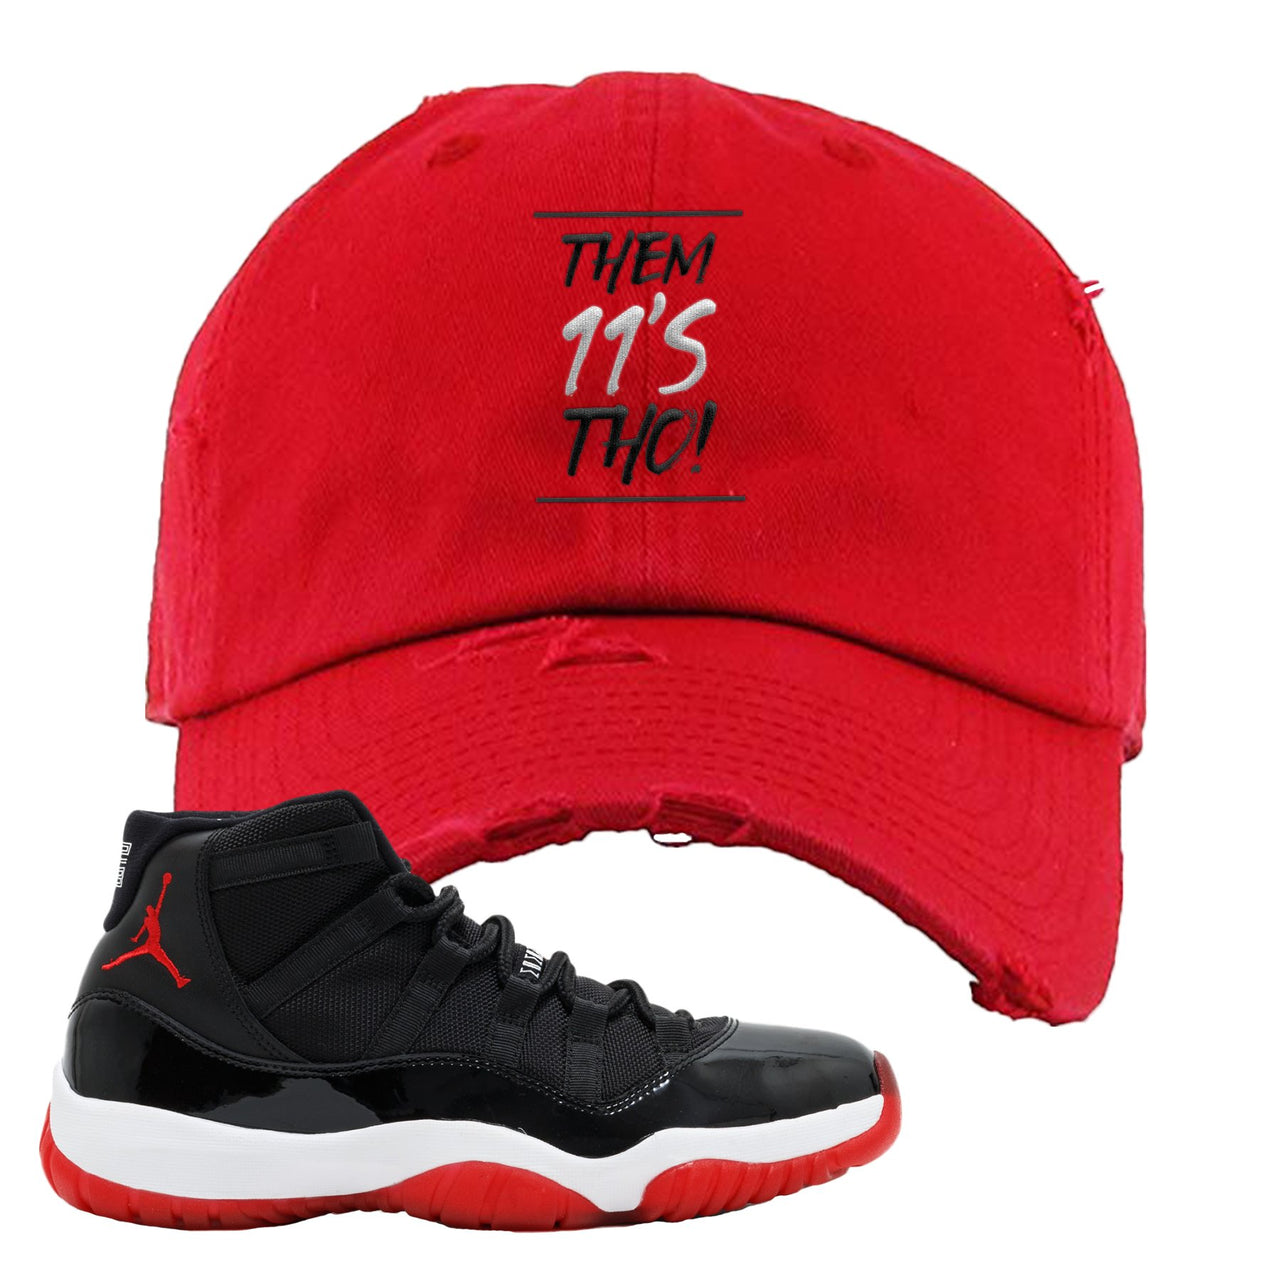 Jordan 11 Bred Them 11s Tho! Red Sneaker Hook Up Distressed Dad Hat